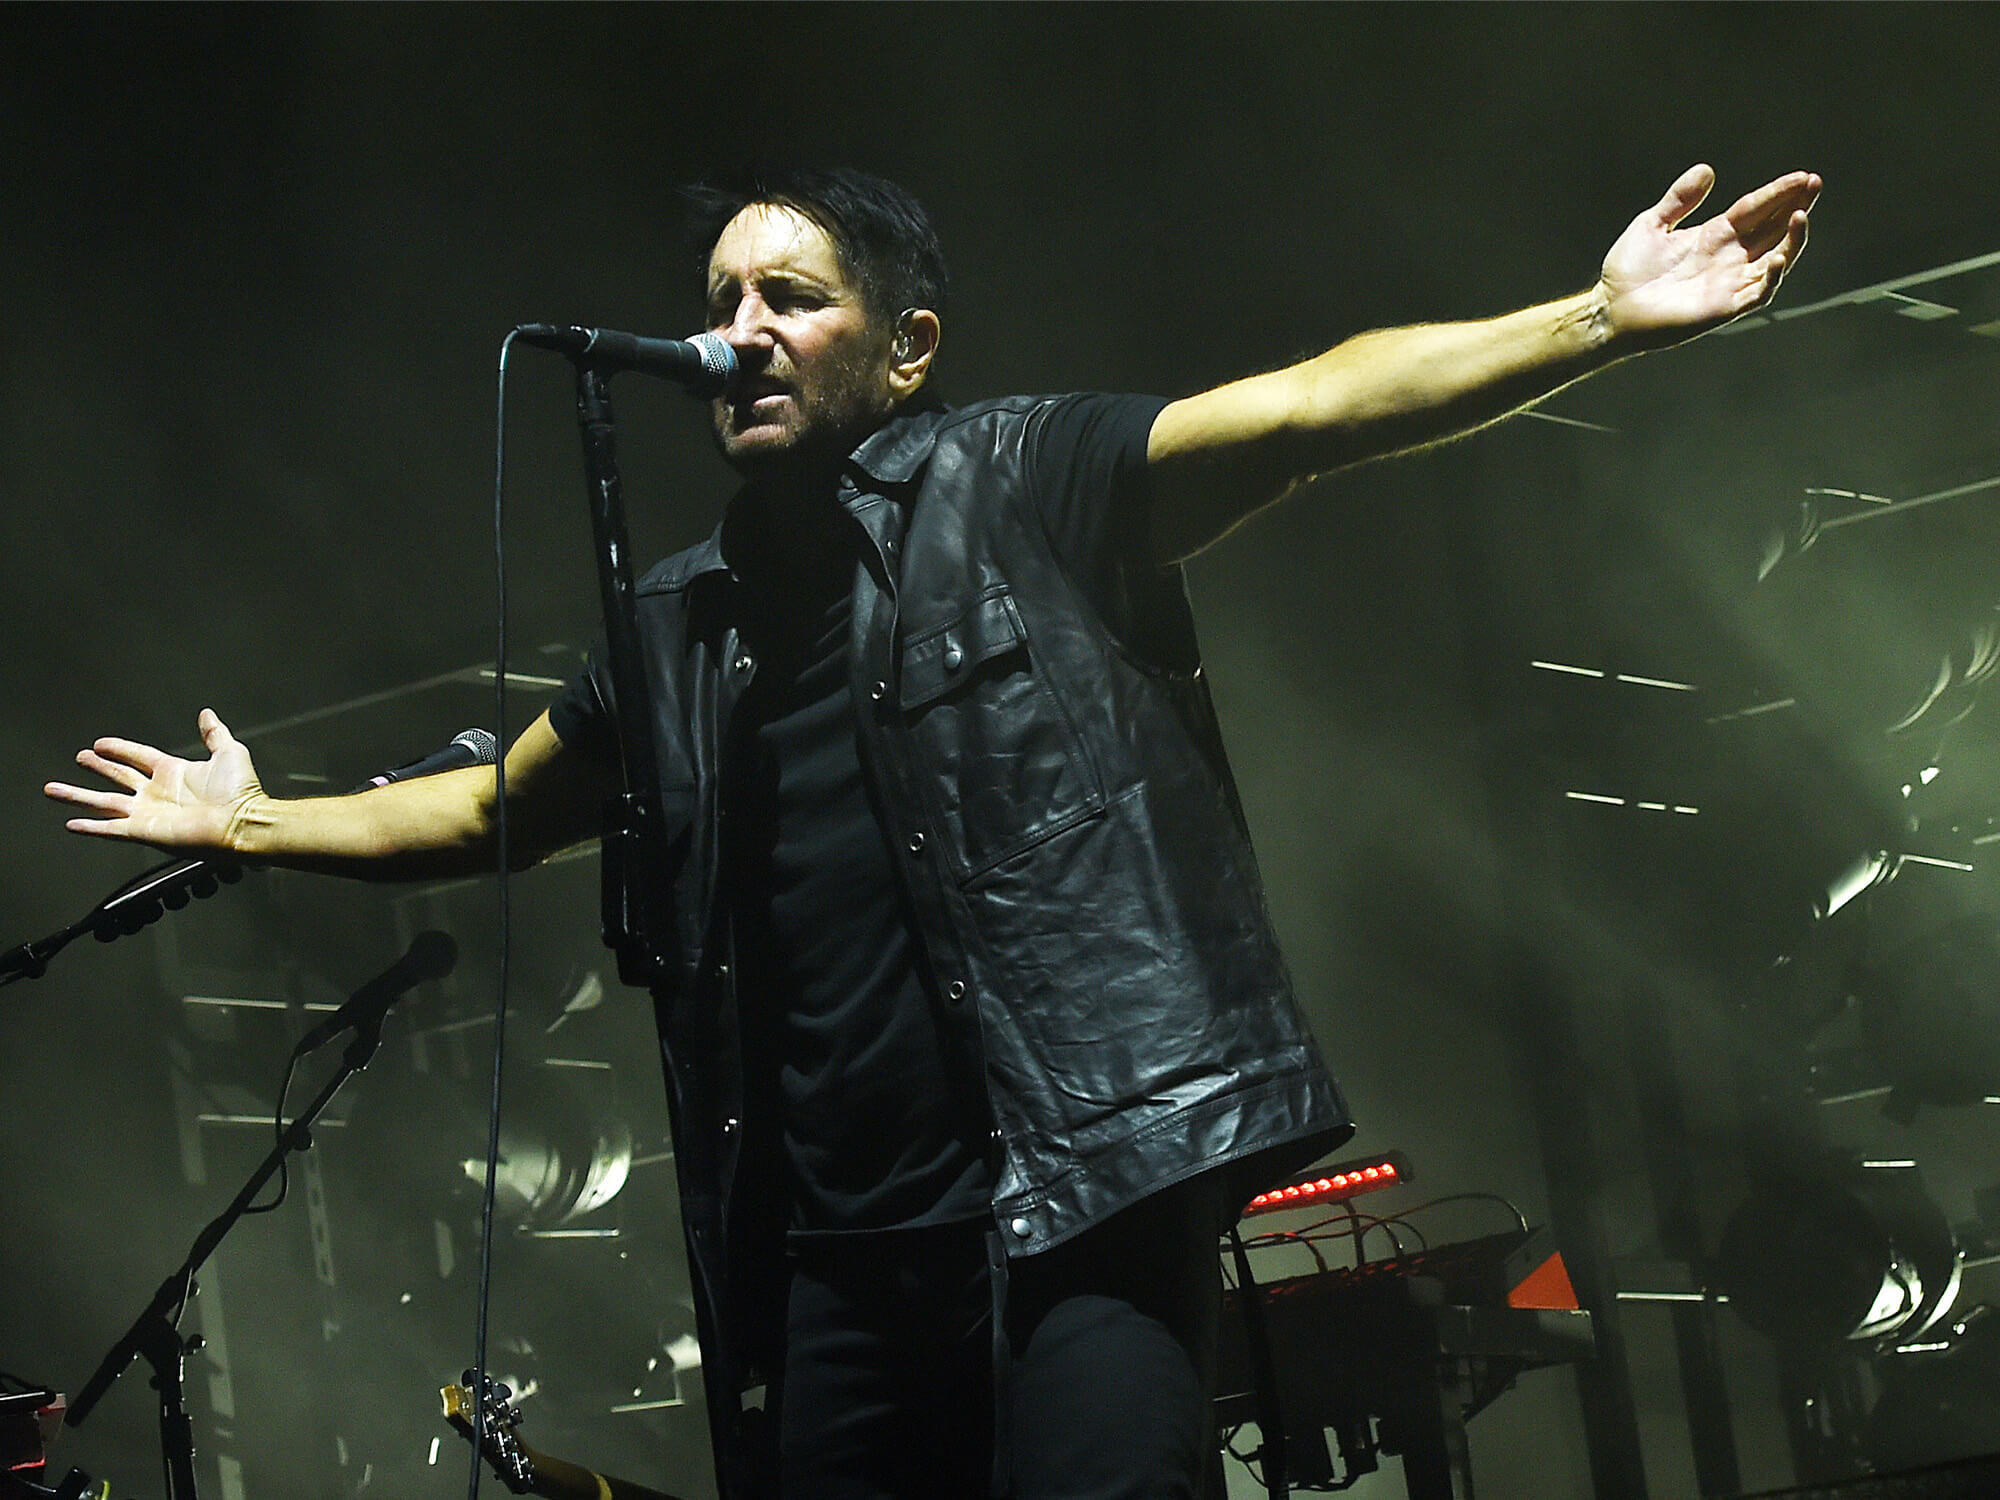 Trent Reznor on stage. He is singing into a mic on a stand and has both arms out to the side.